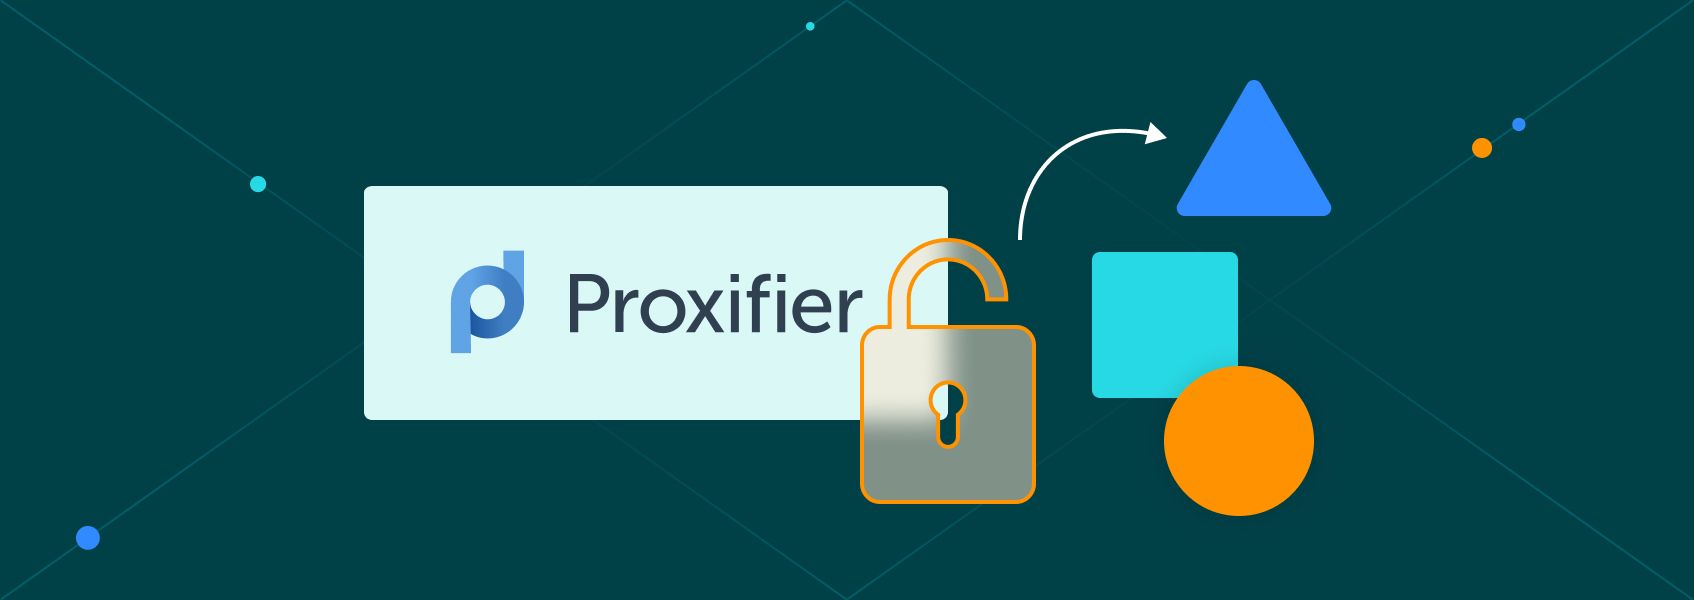 How to Use Proxifier to Bypass Restrictions